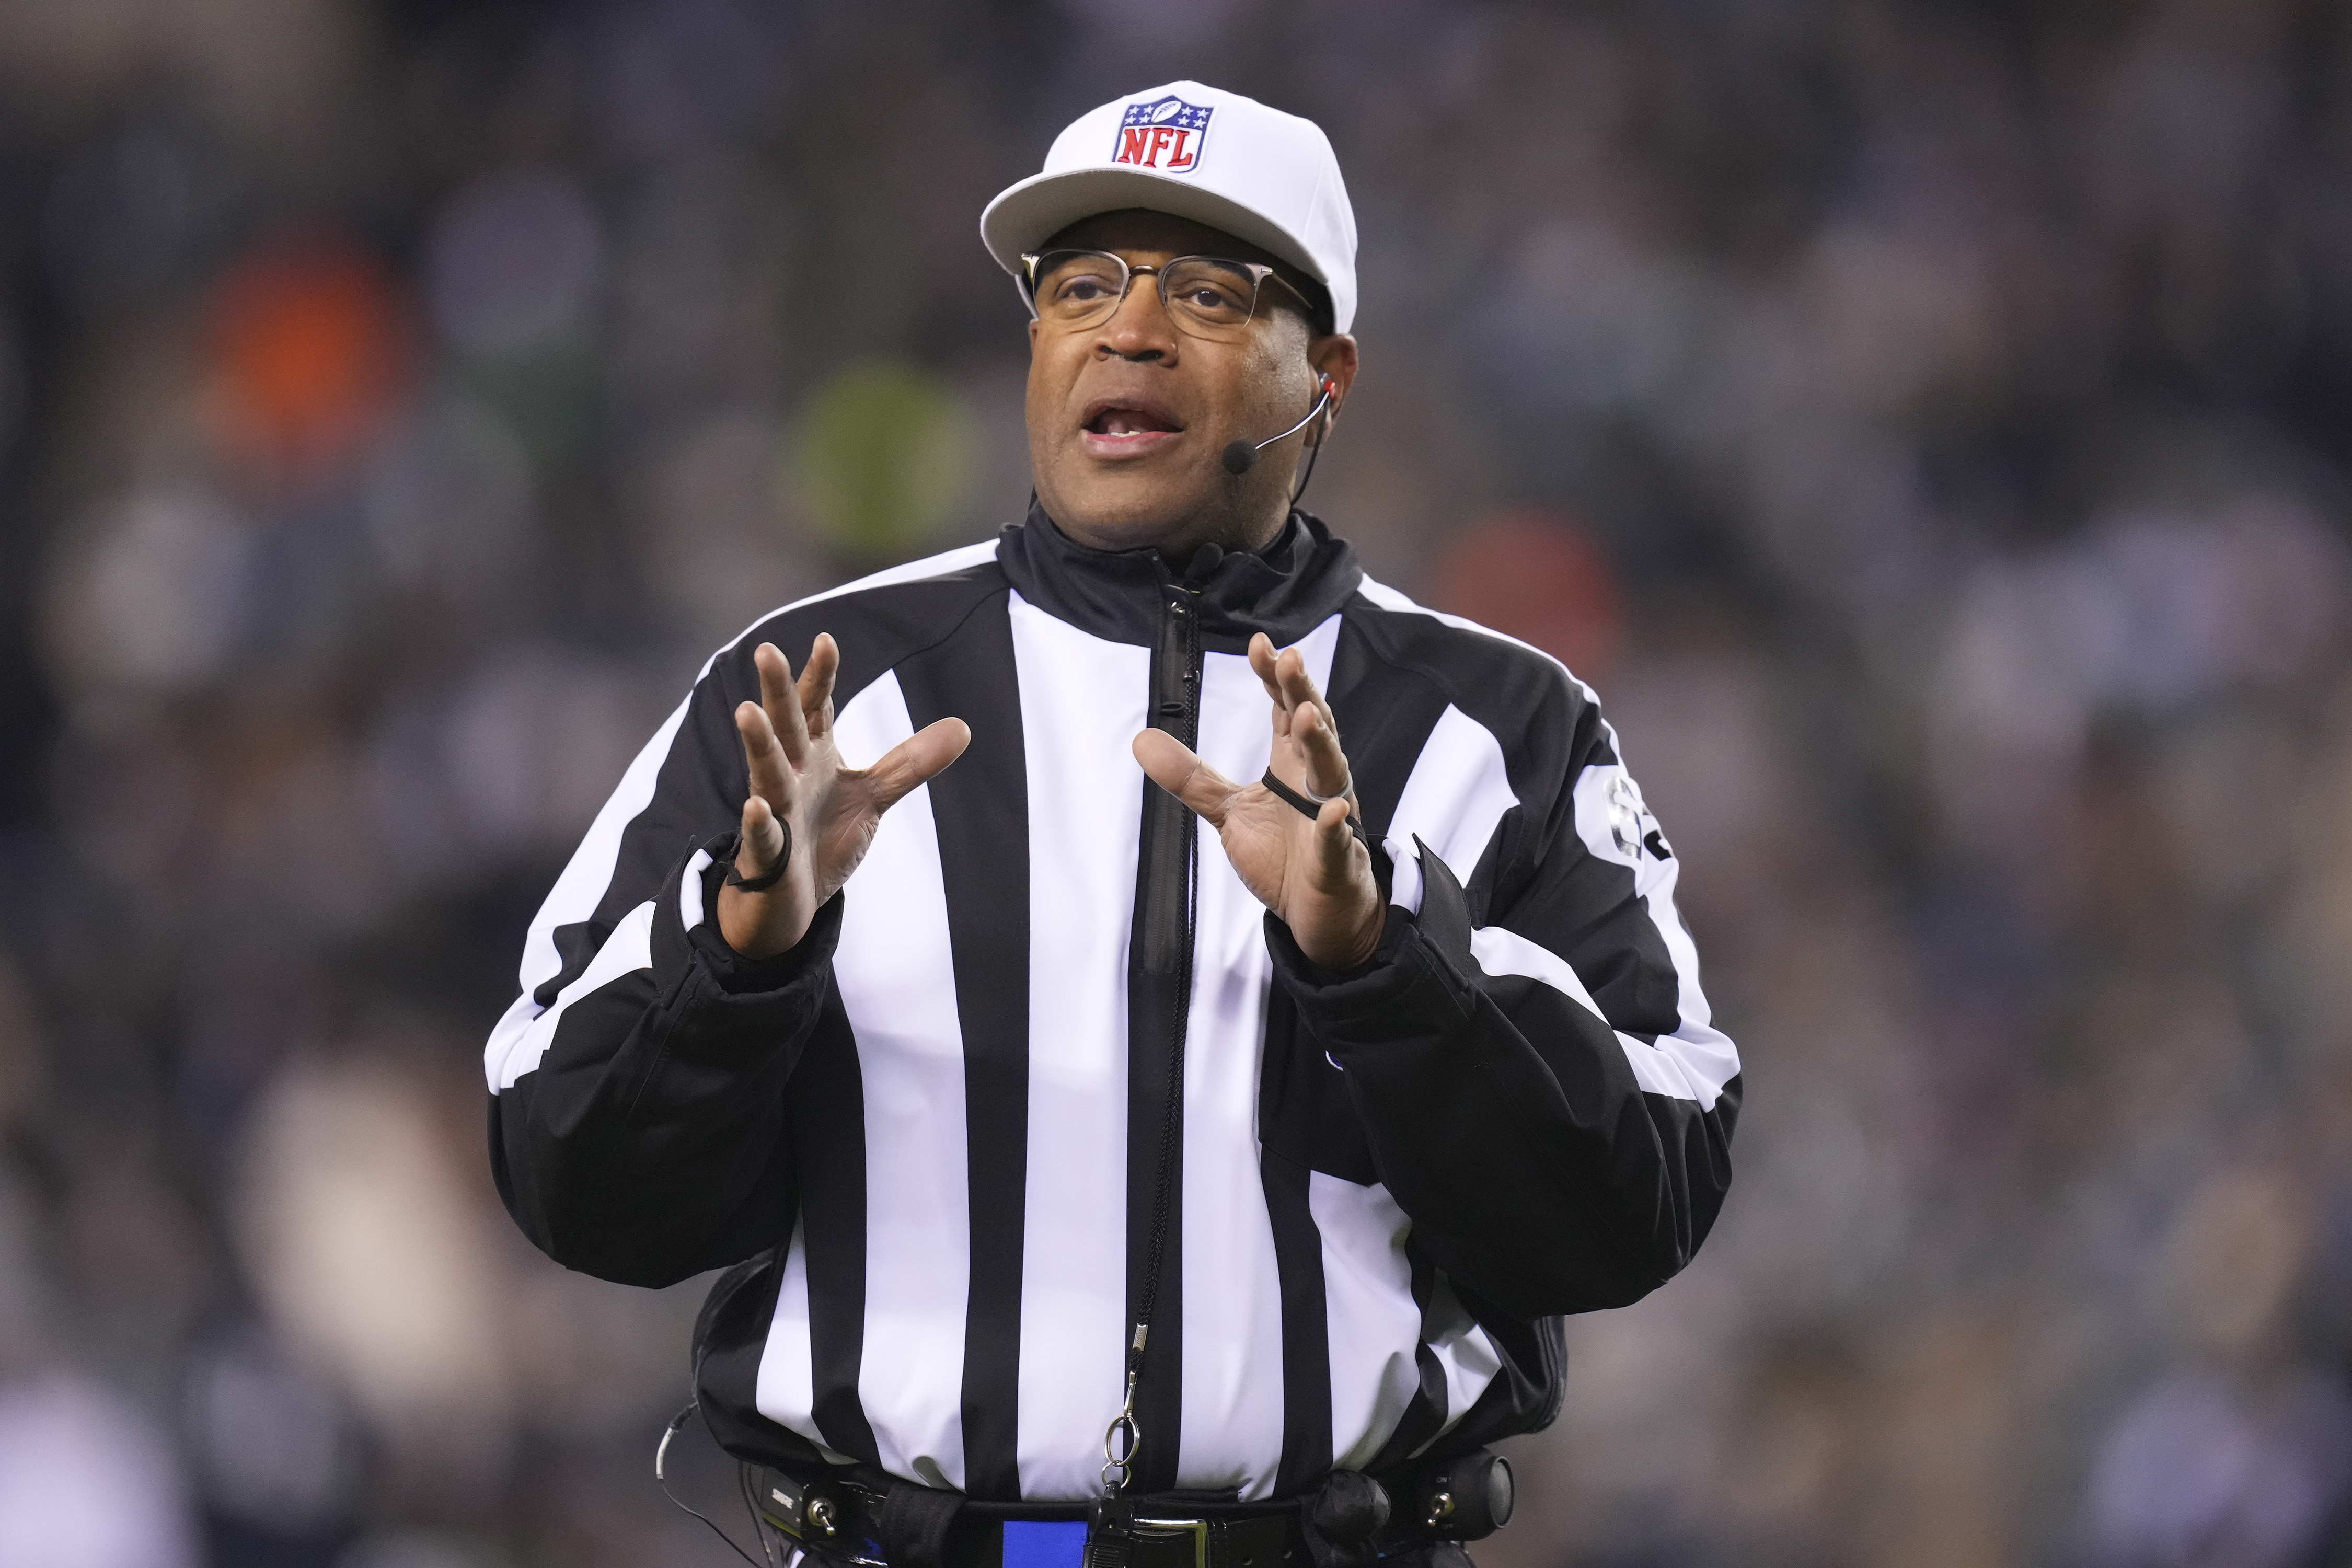 Referee Ronald Torbert #62 looks on during the game between the Dallas Cowboys and Philadelphia Eagles at Lincoln Financial Field on January 8, 2022 in Philadelphia, Pennsylvania.